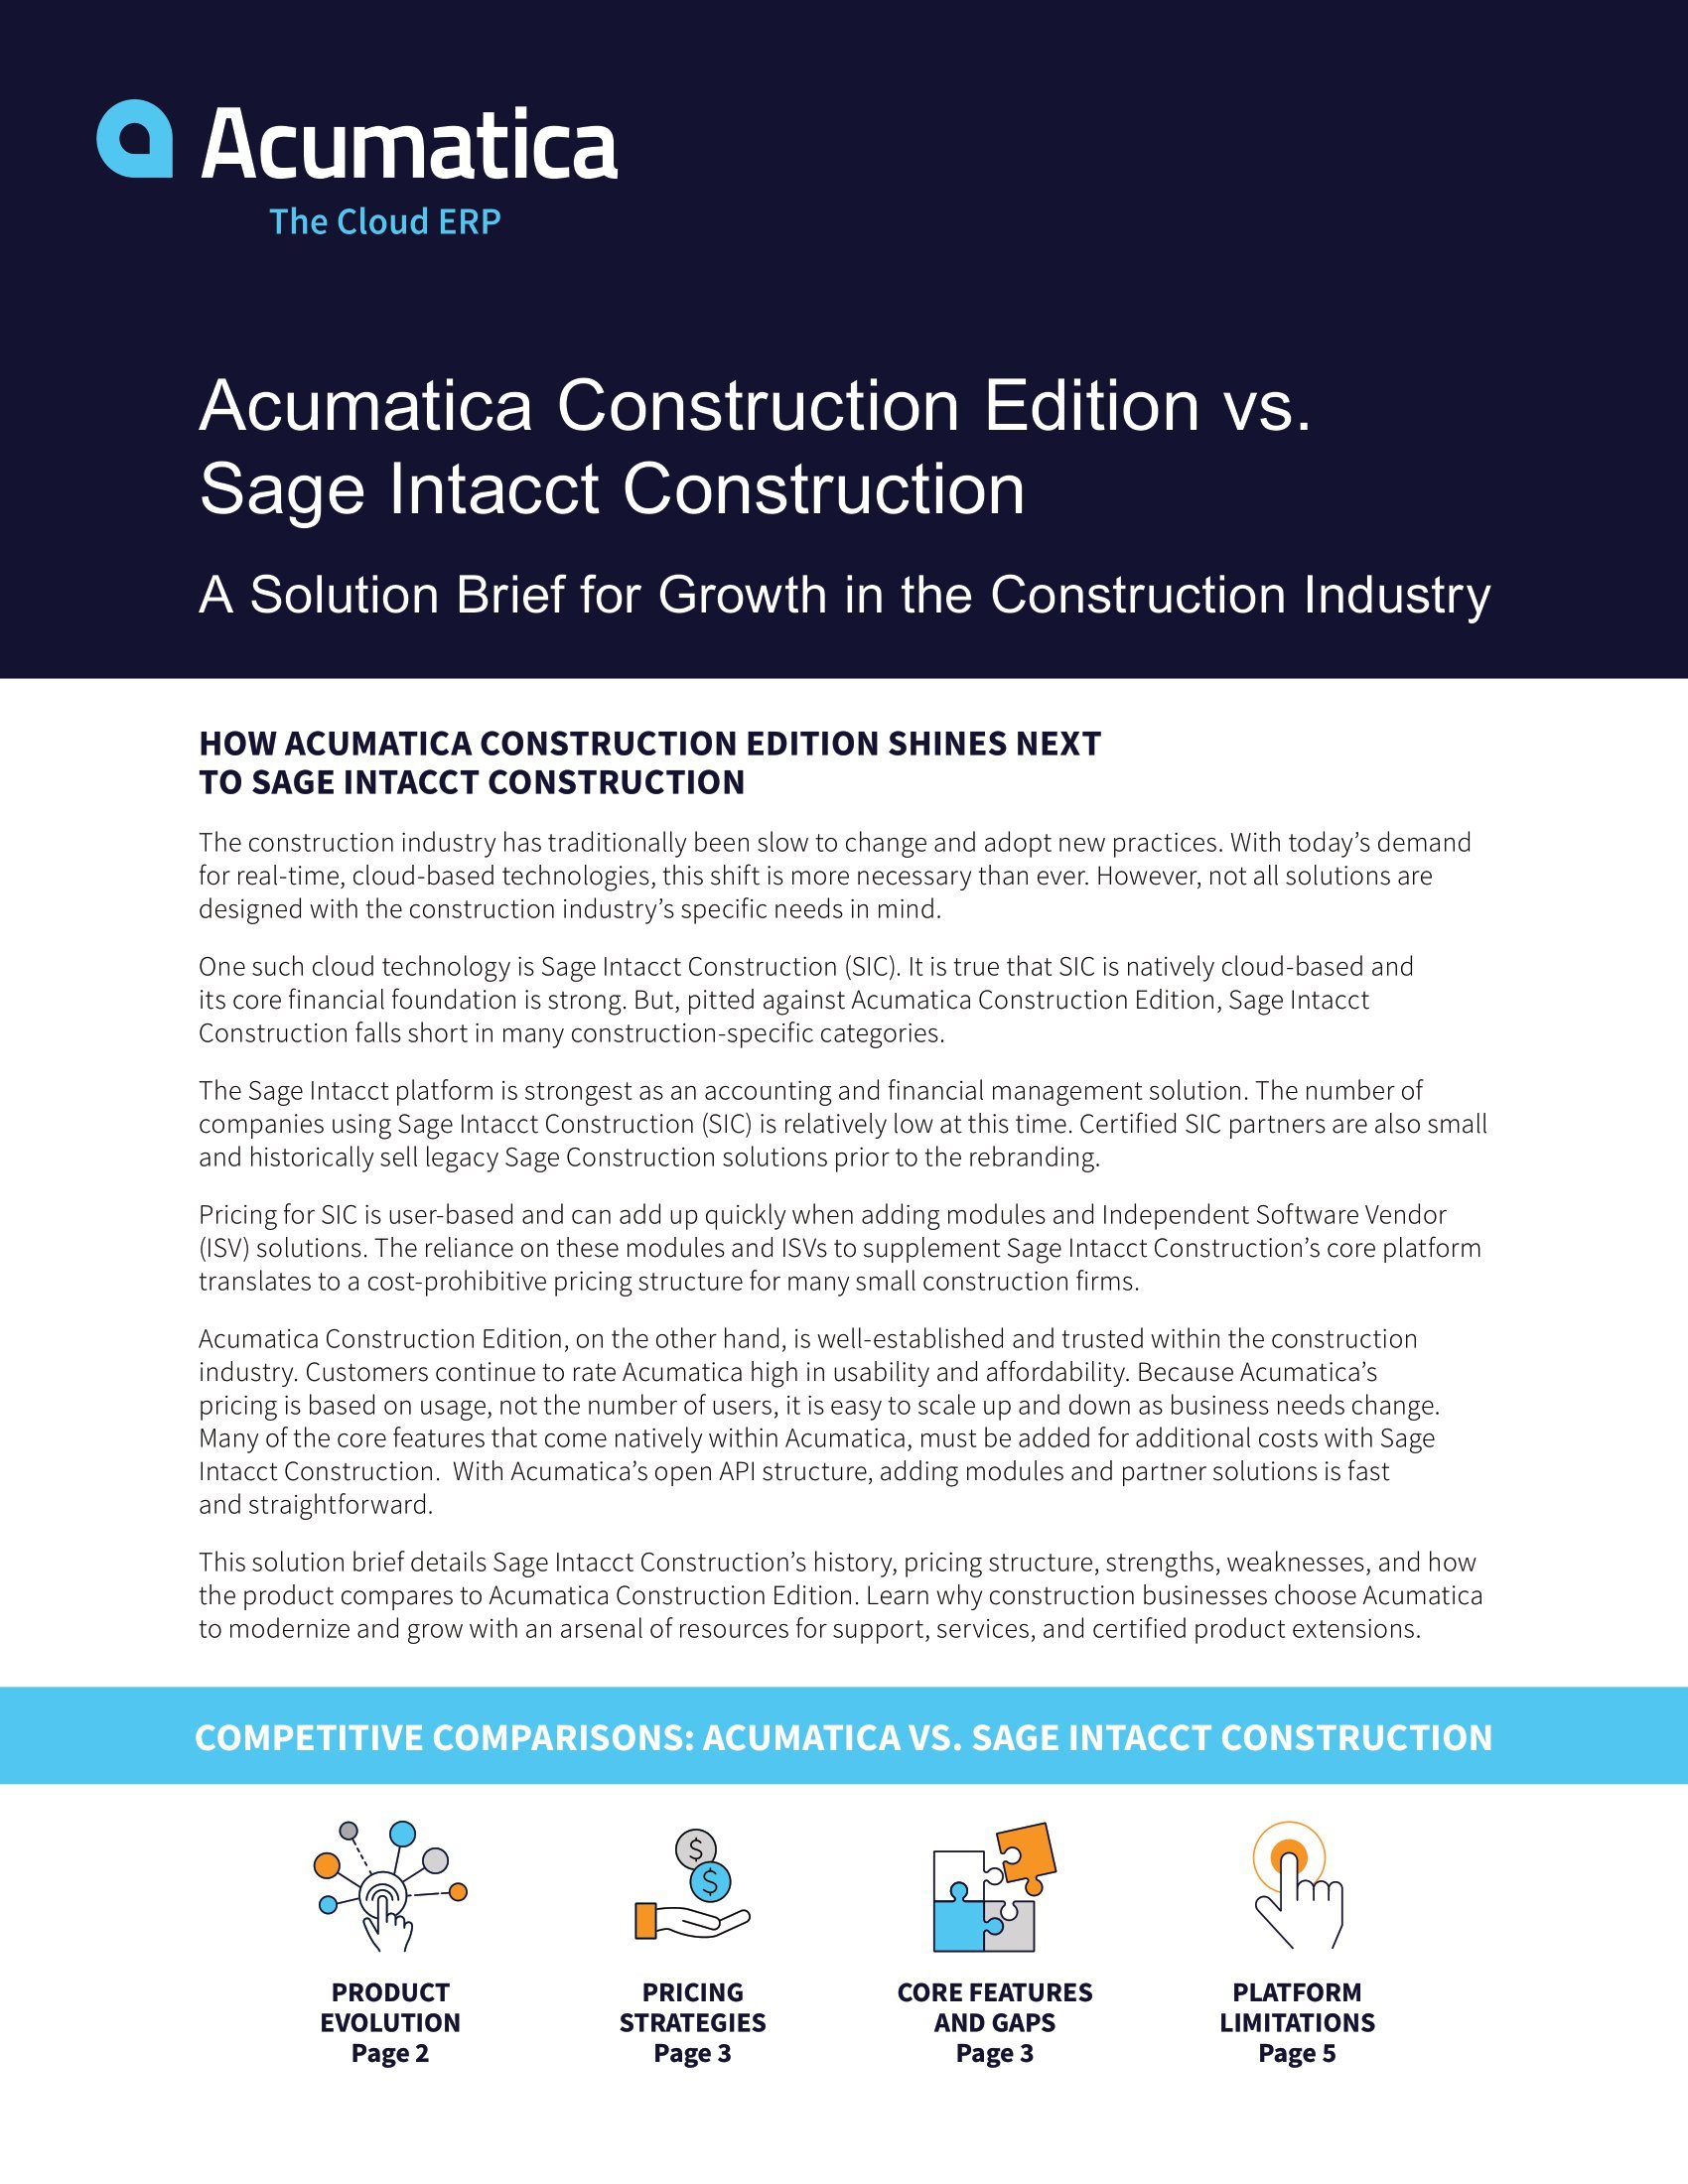 Comparing Acumatica Construction Edition to Sage Intacct Construction